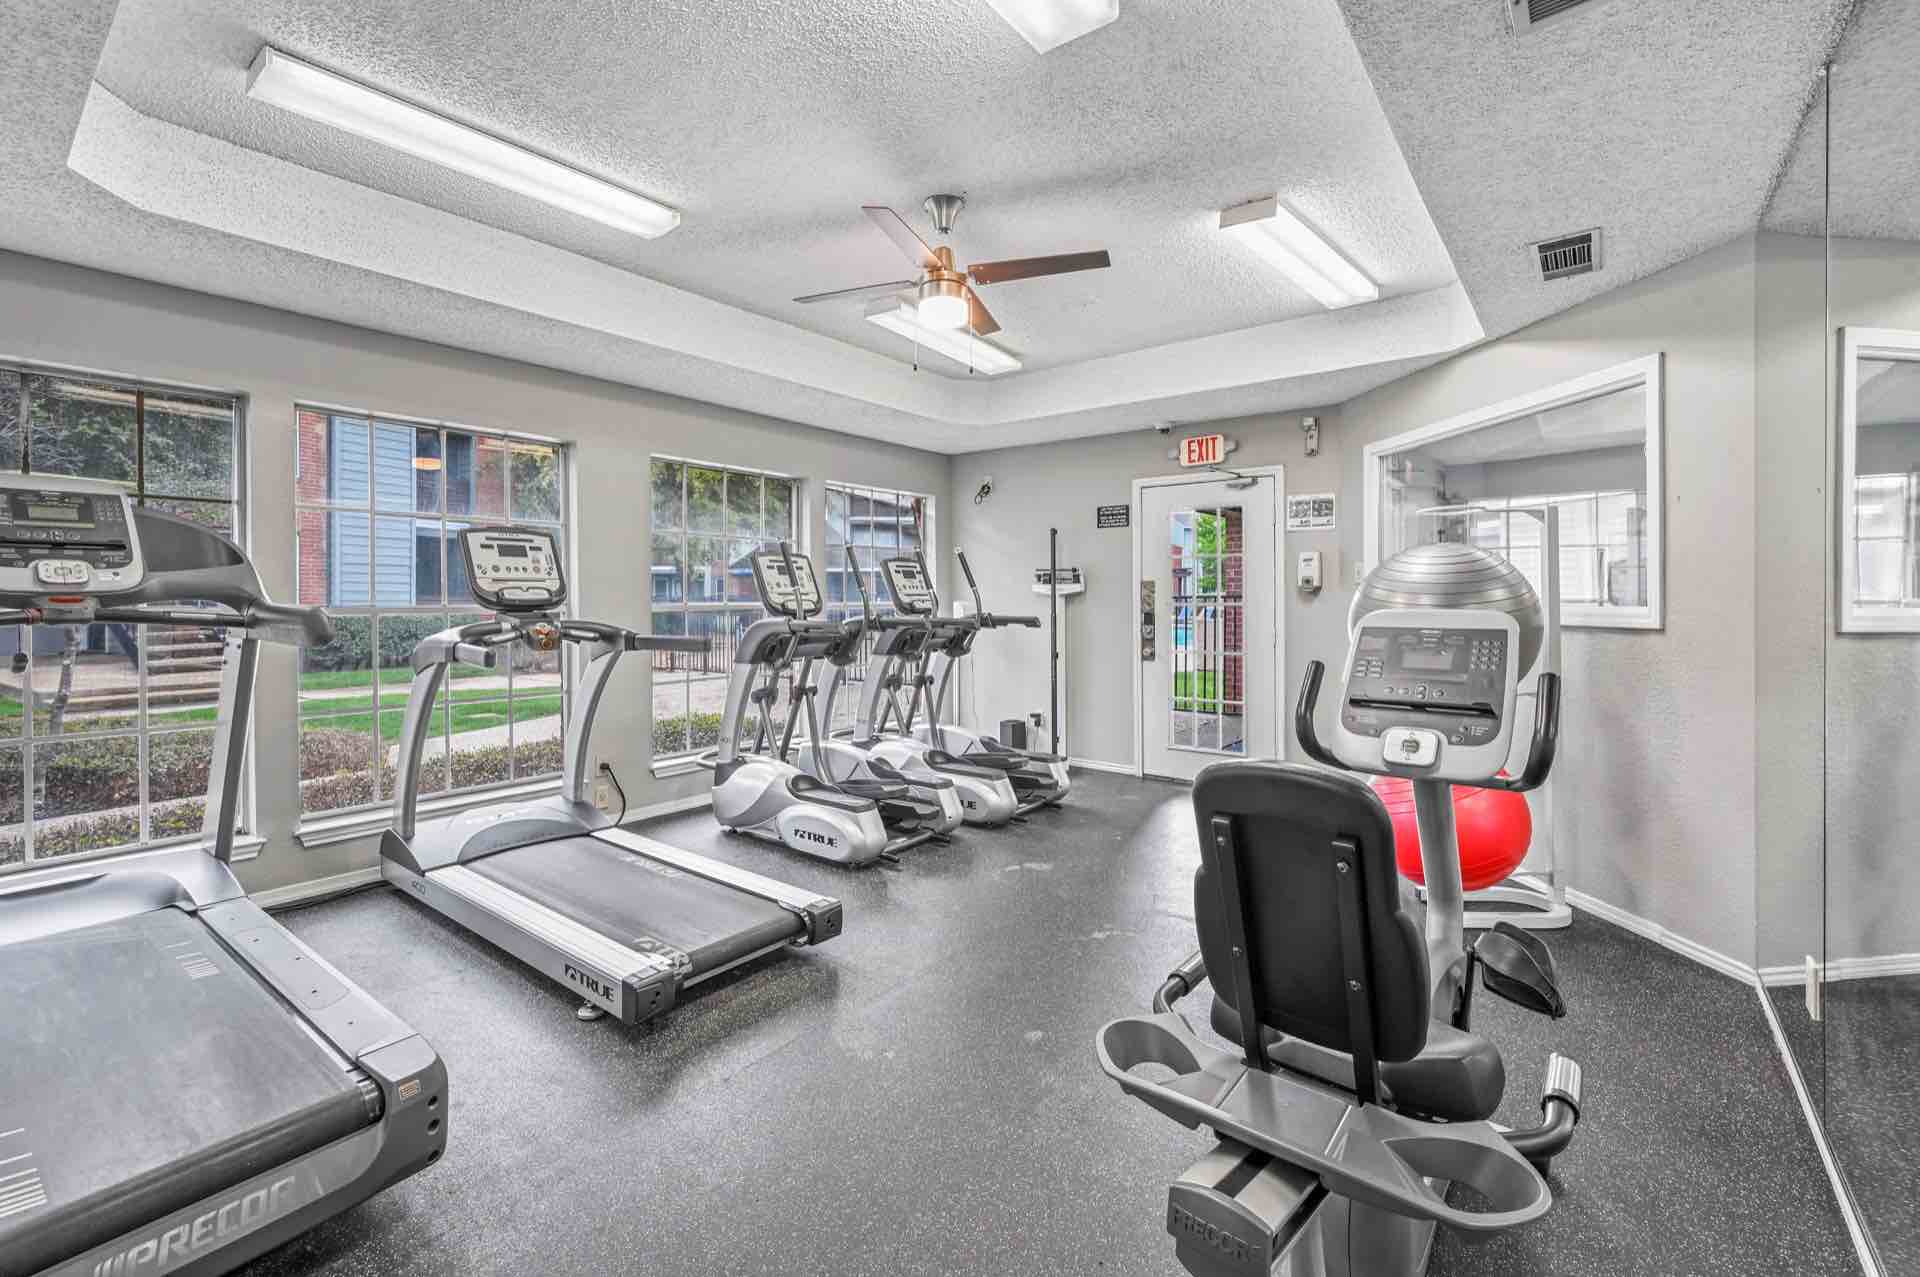 Fitness center with sitting bike, treadmills and elliptical machines